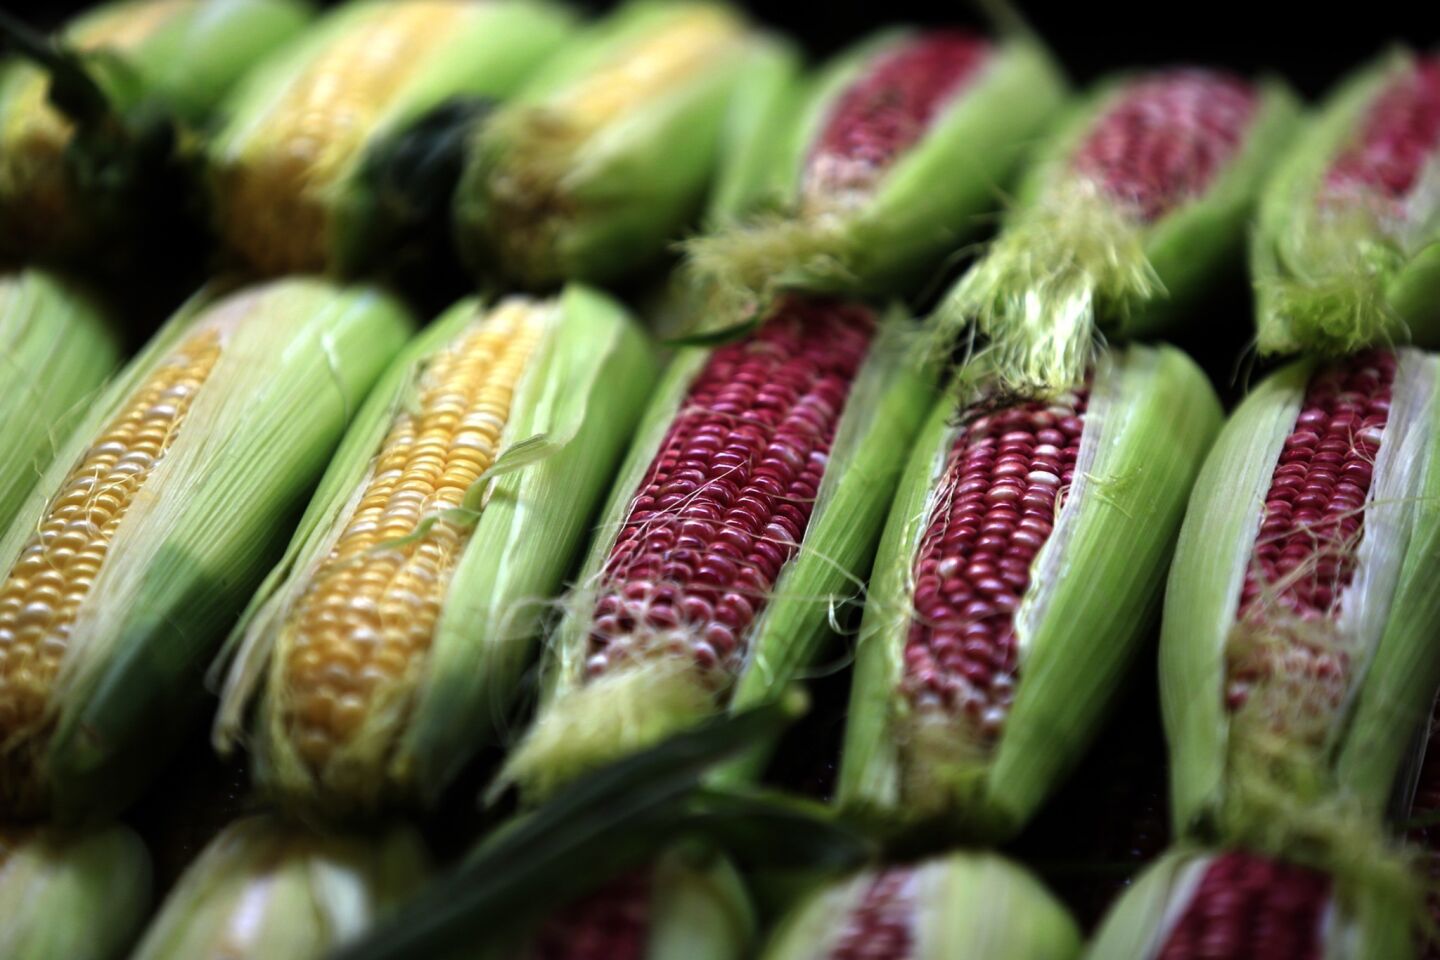 Even the corn is colorful.